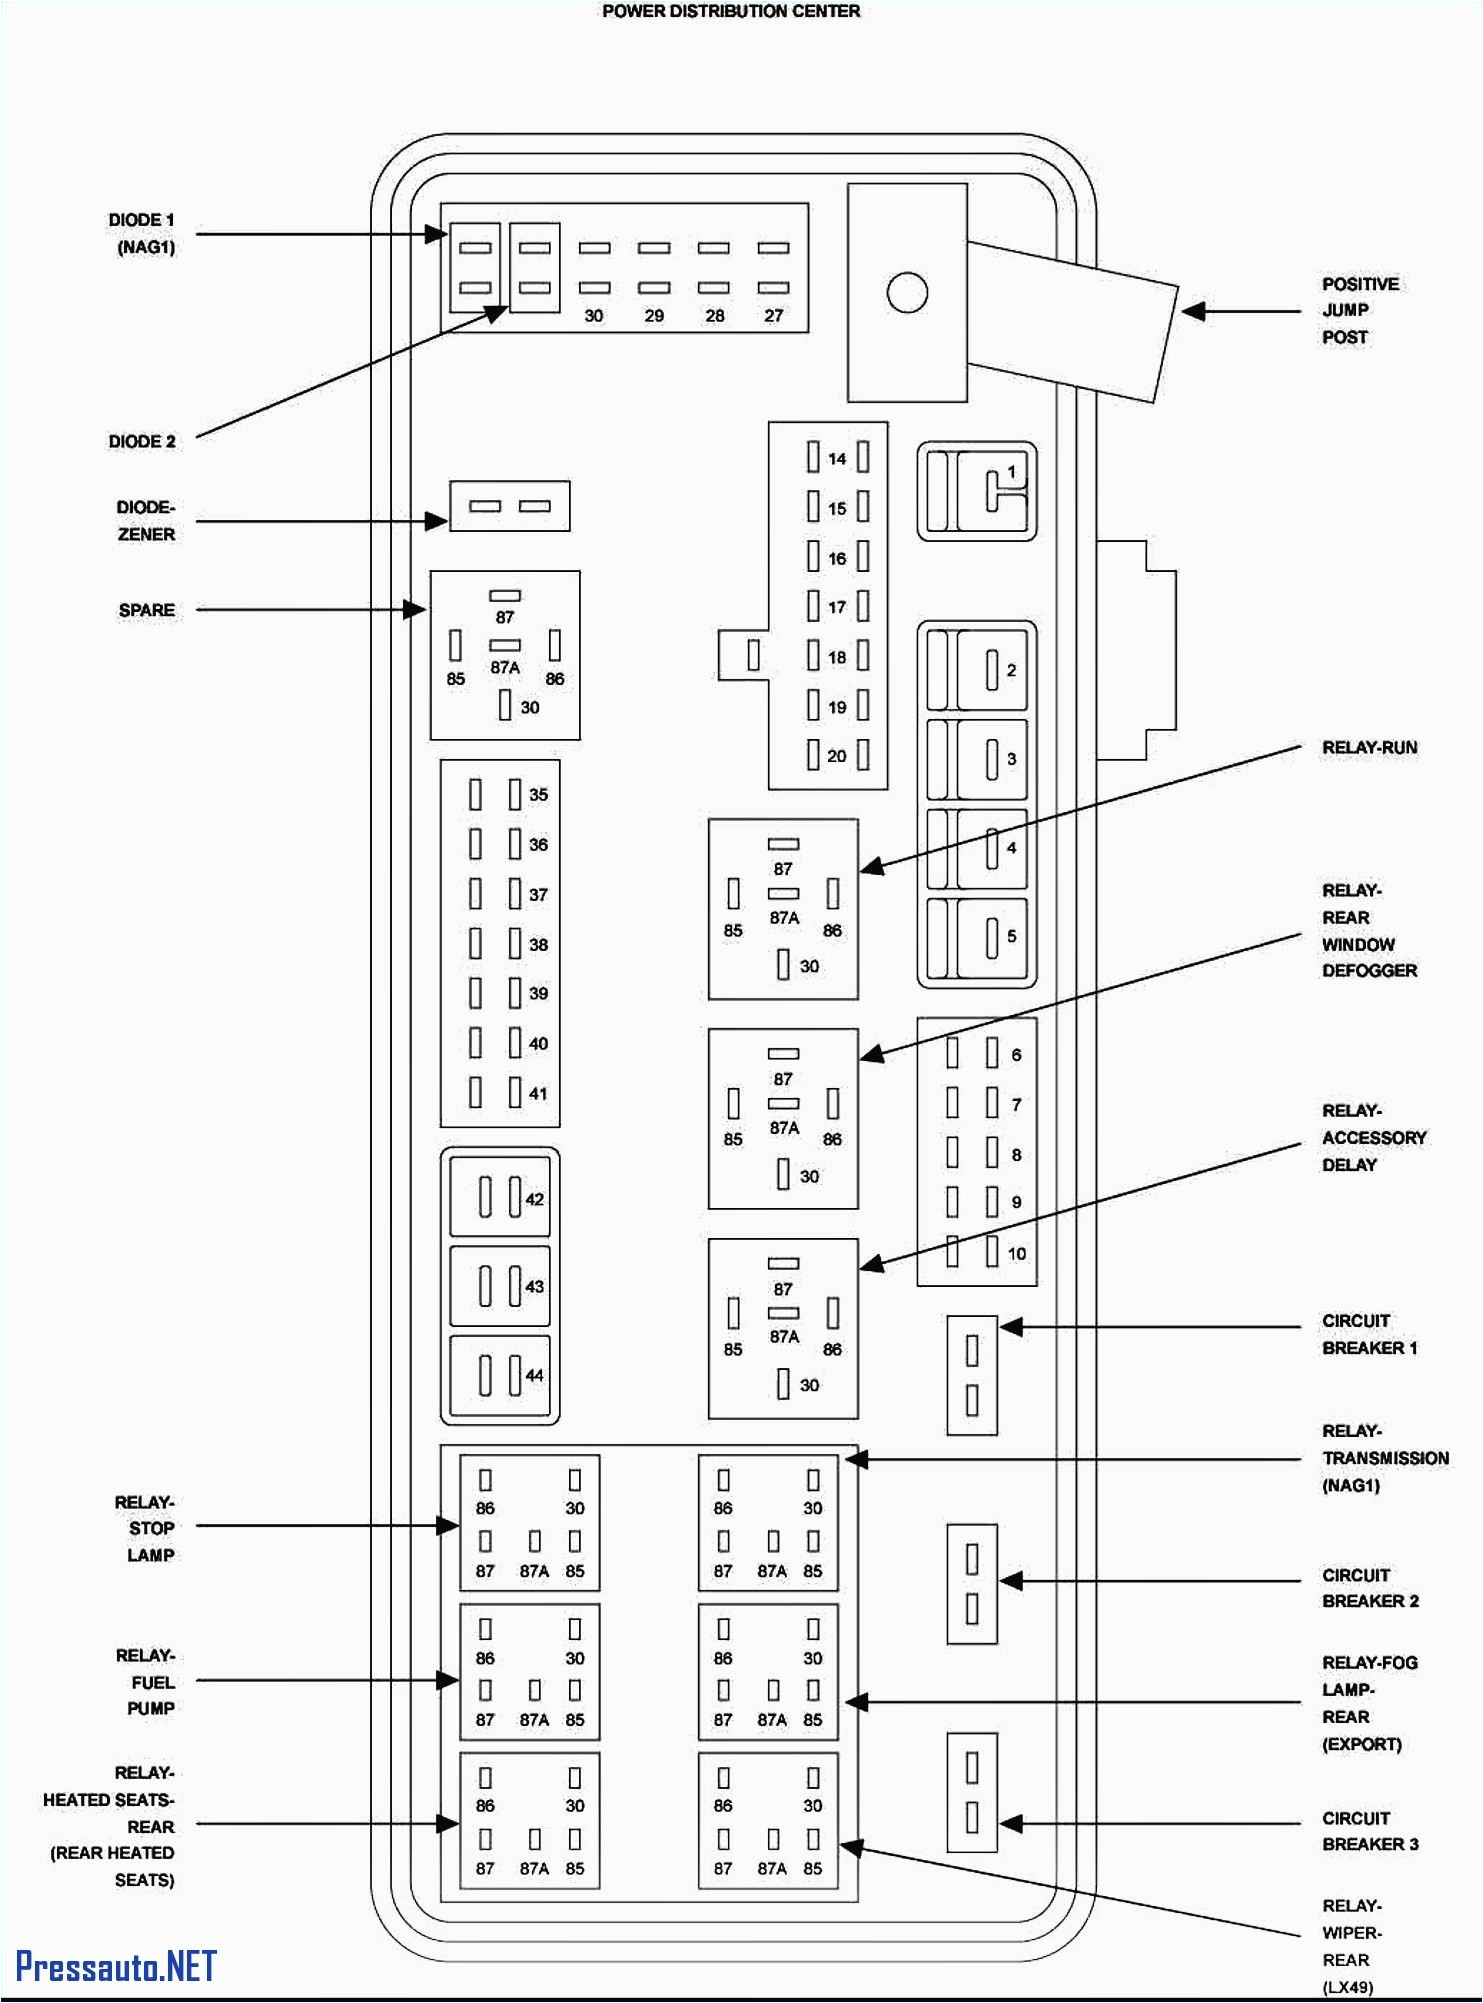 fuse box chrysler town and country 2012 wiring diagram post2006 chrysler town amp country fuse box